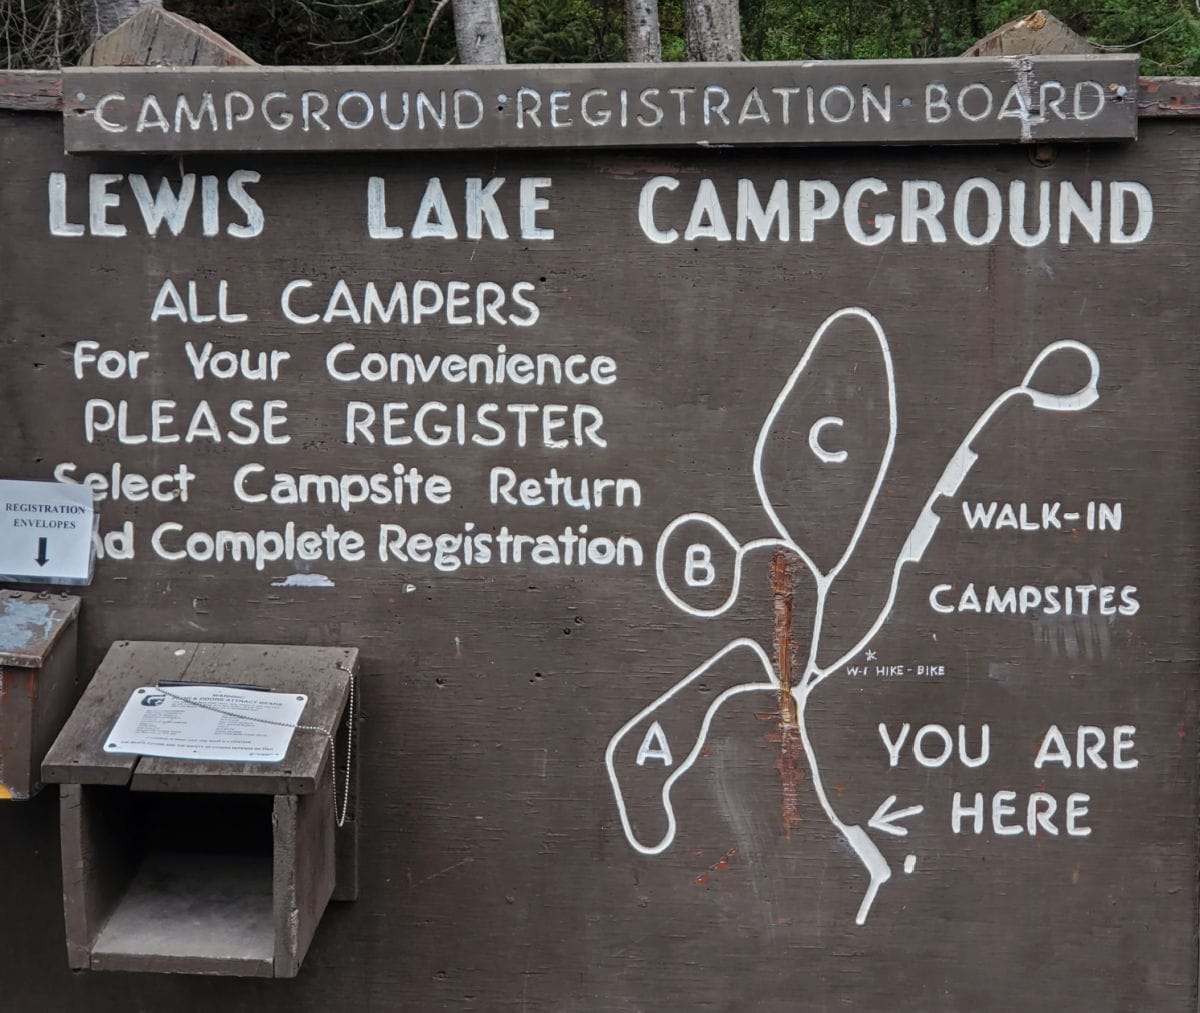 Lewis Lake Campground Map from Bulletin Board in Yellowstone National Park